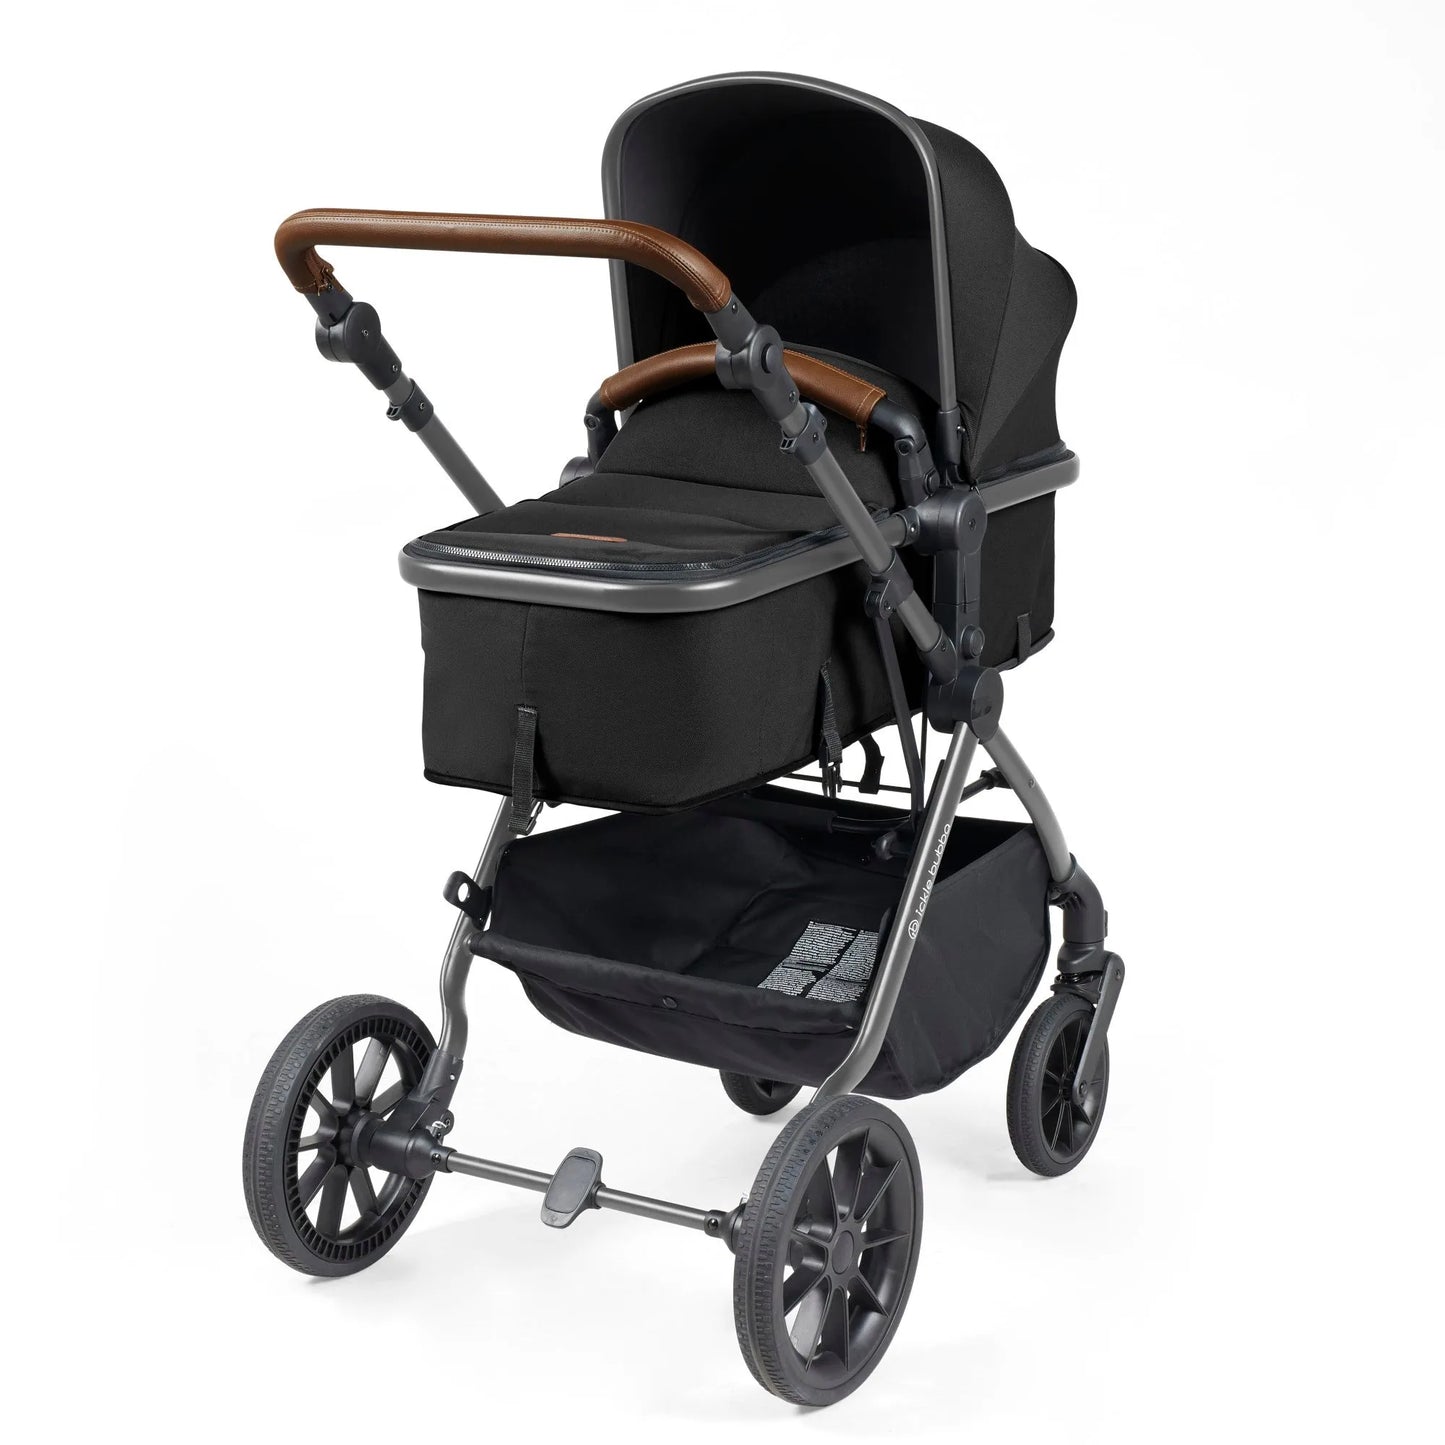 Ickle Bubba Cosmo All in One i-Size Travel System with ISOFIX Base - Black *PRE ORDER END NOVEMBER